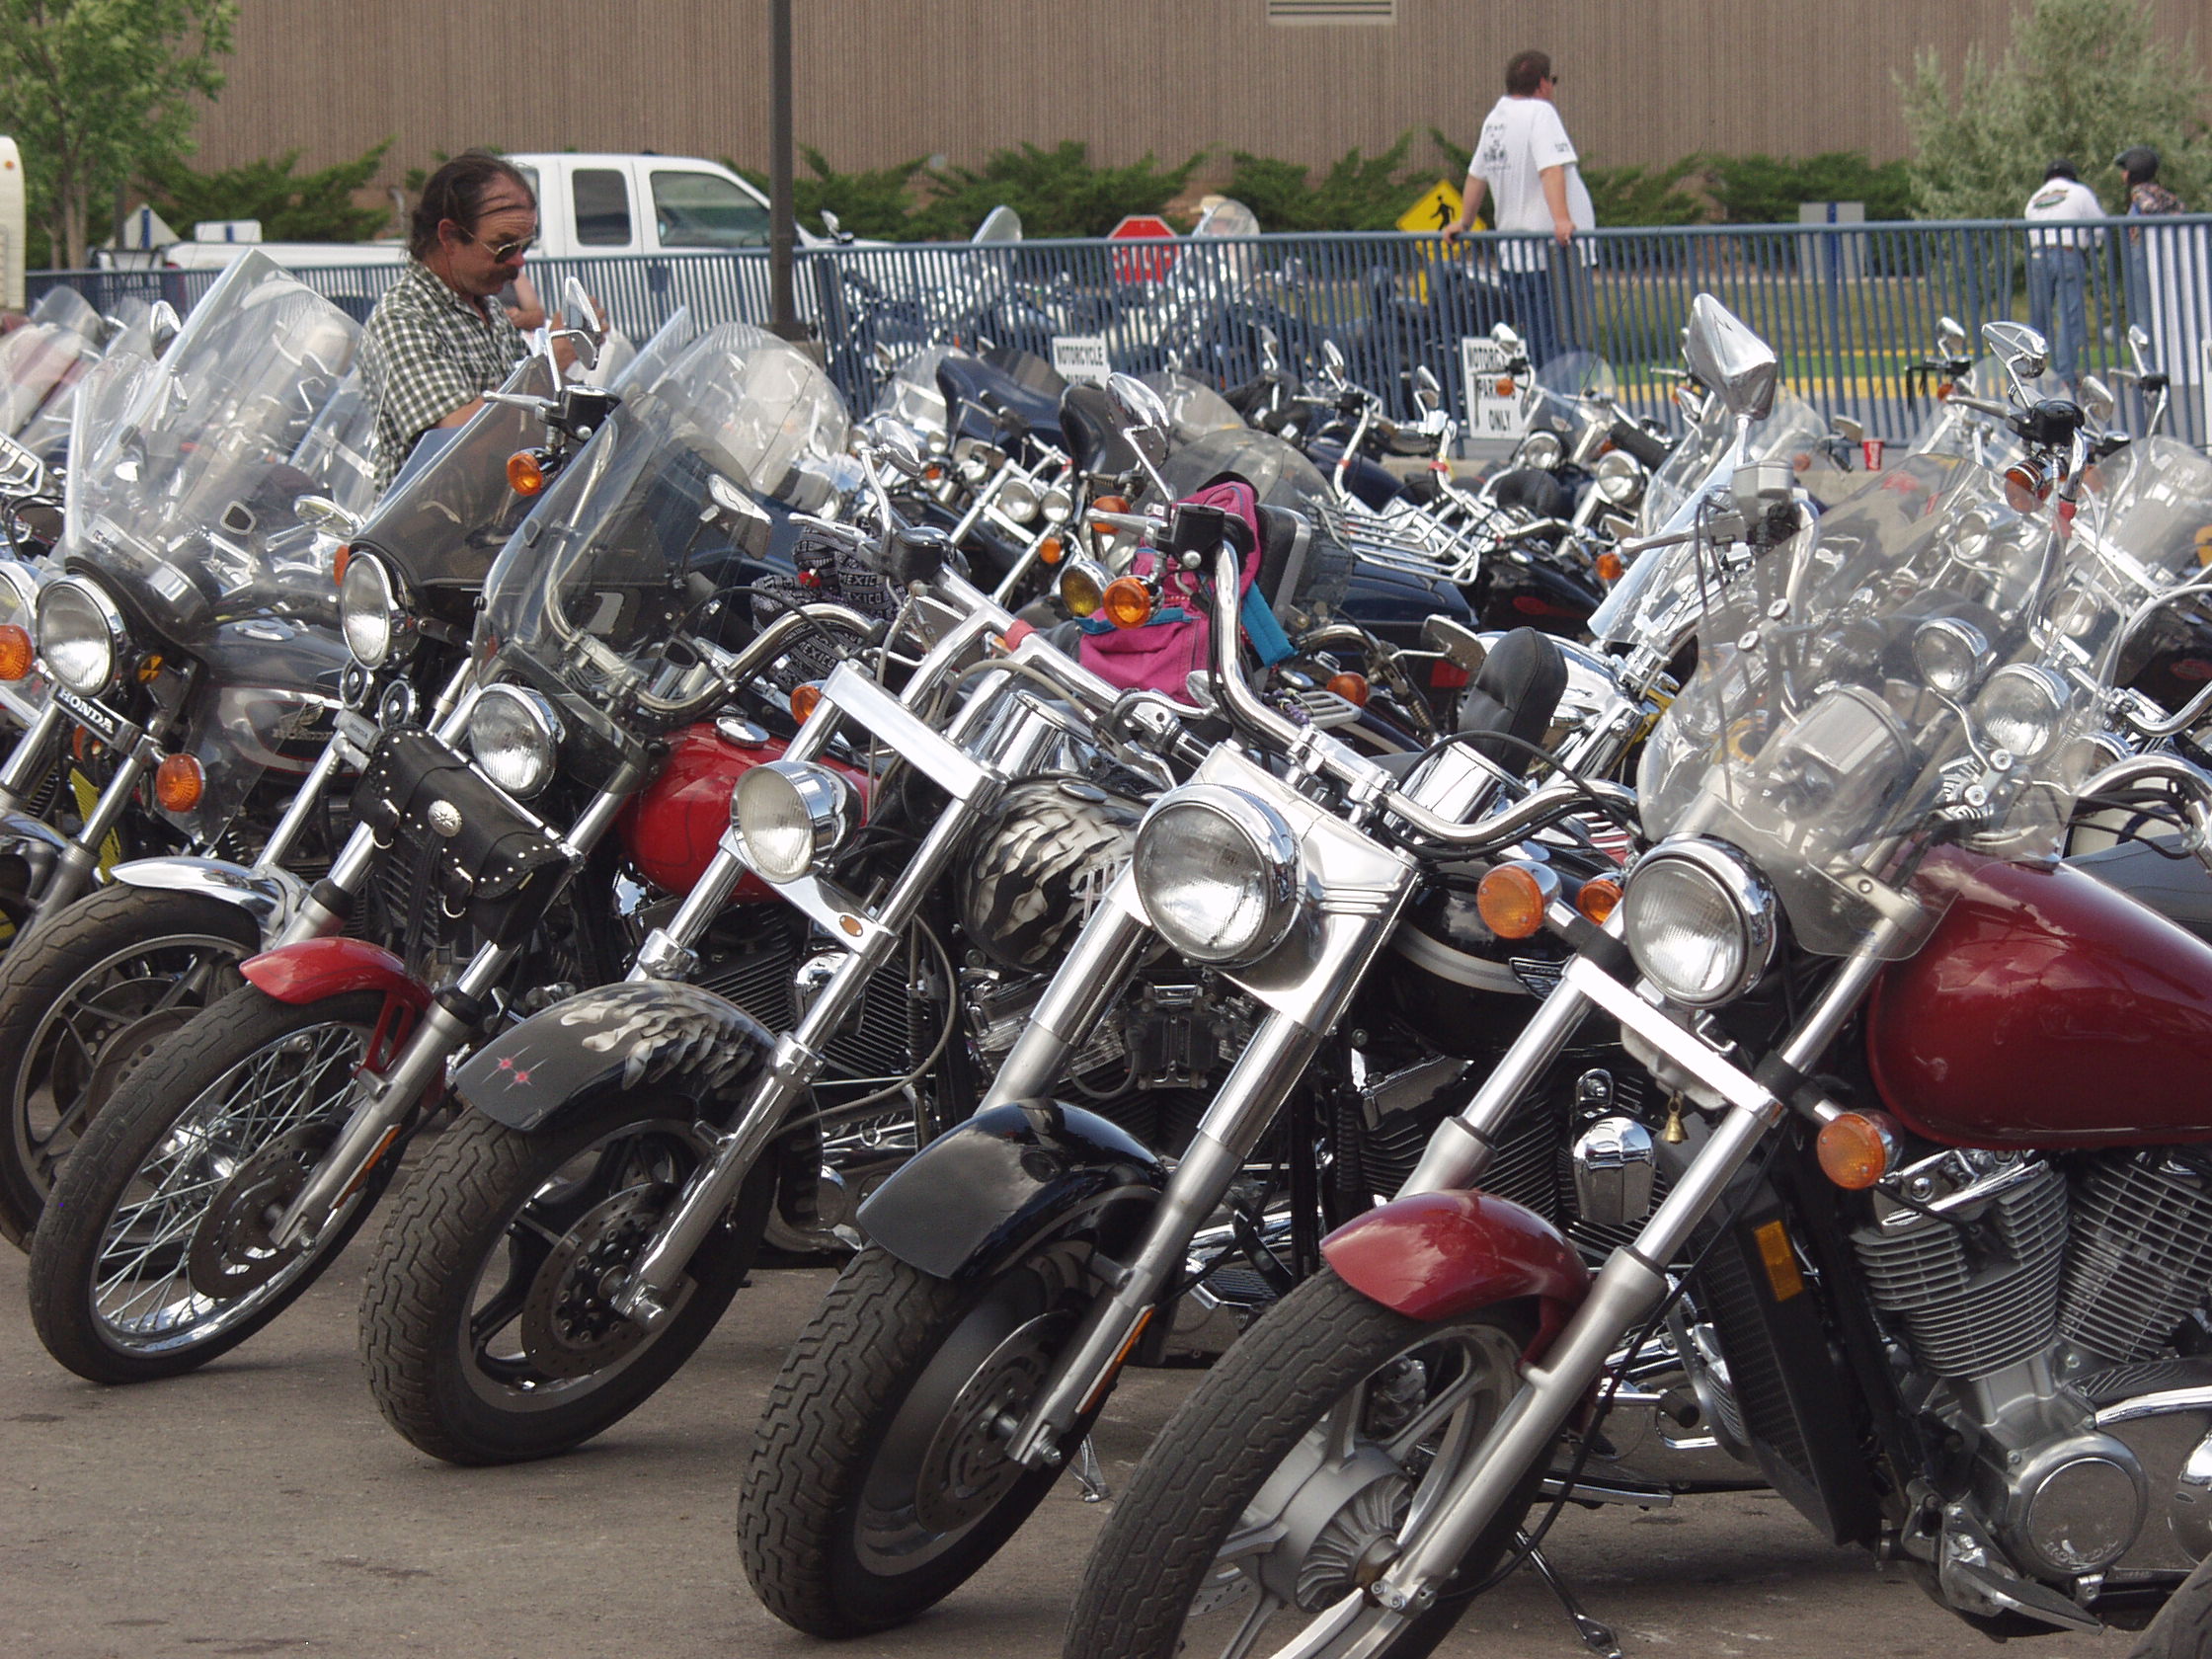 Motorcycle Row